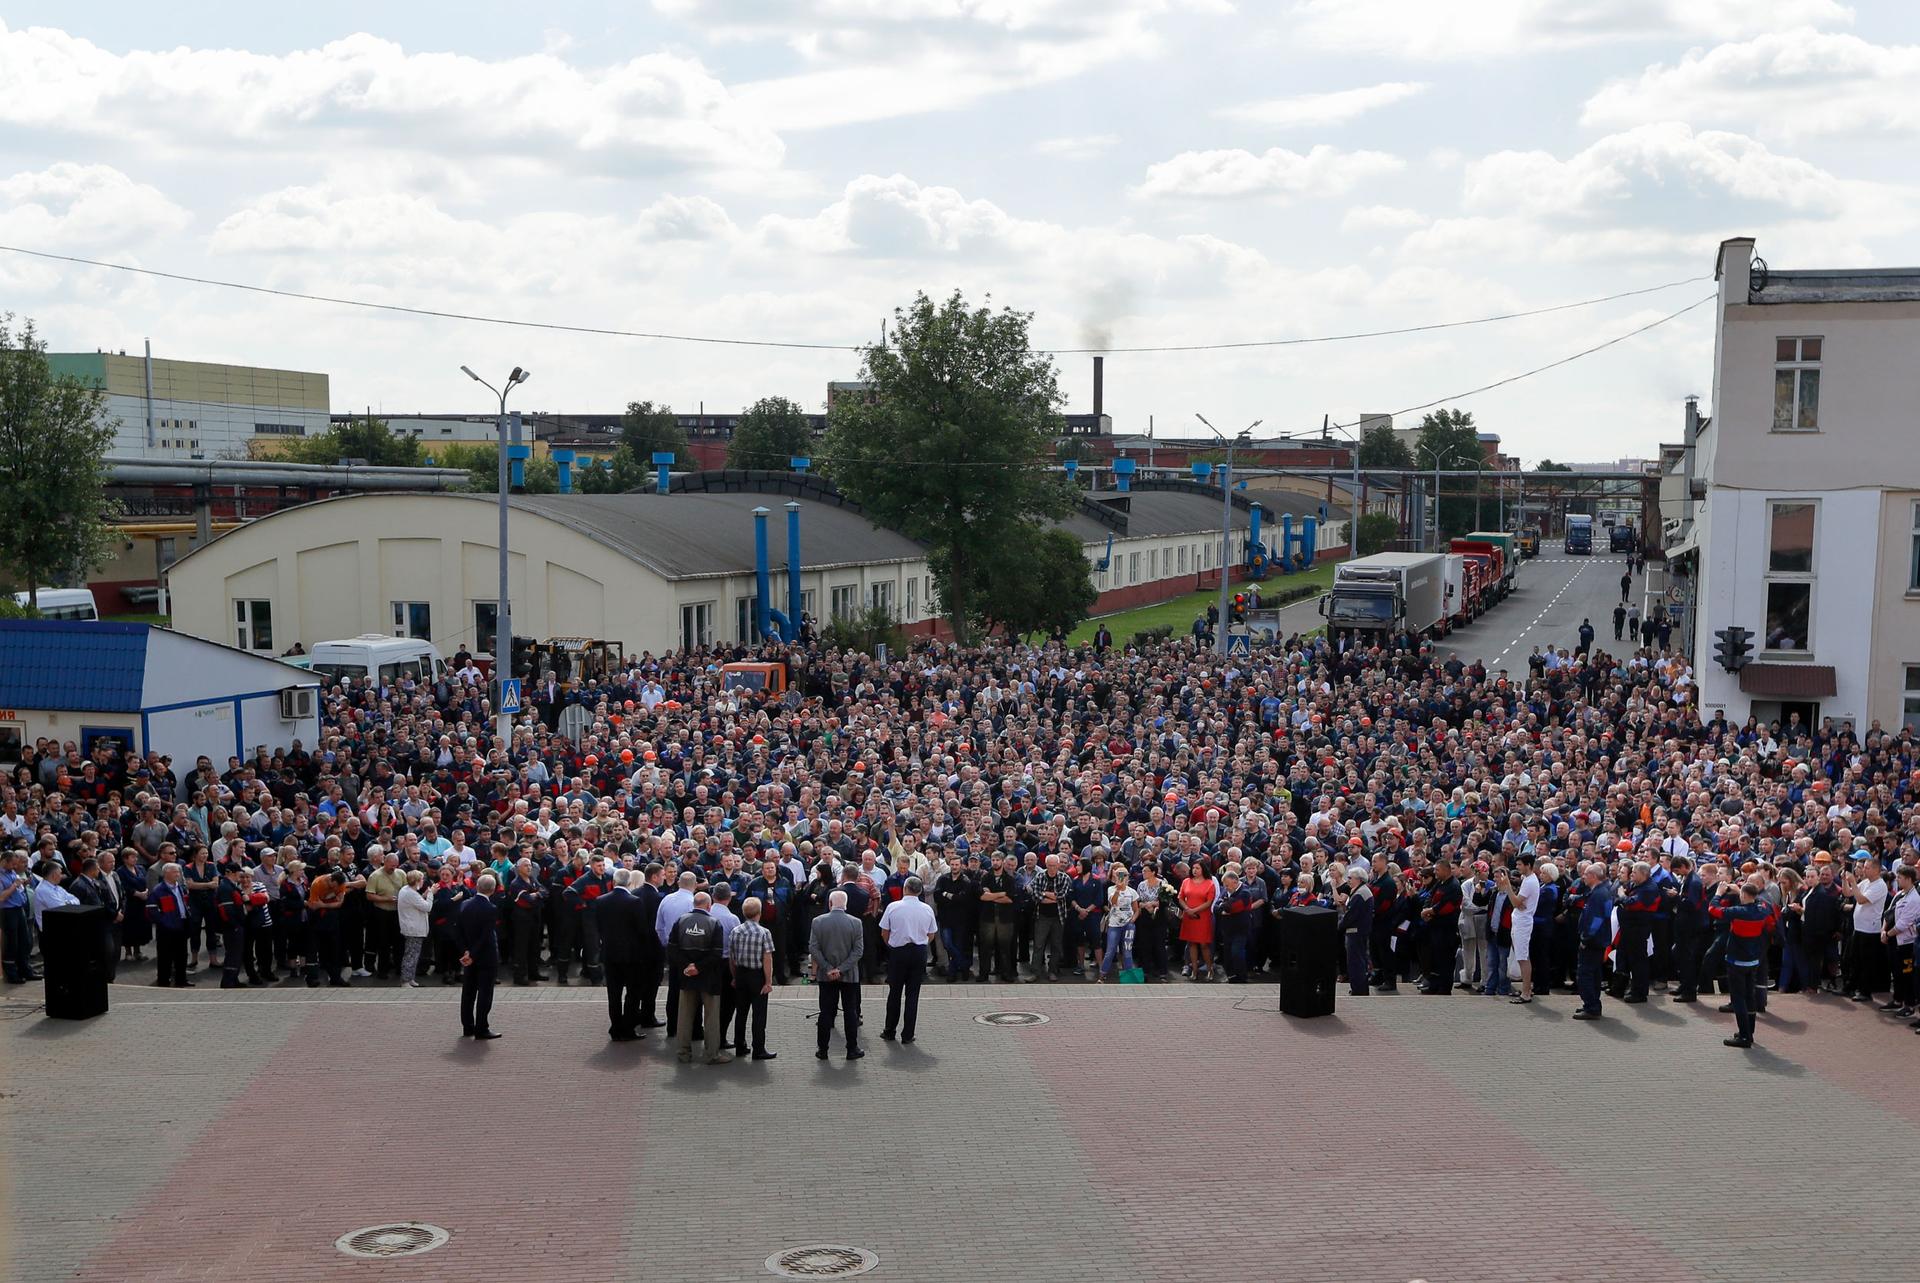 A large crowd of people are shown in the street with a factory in the background.